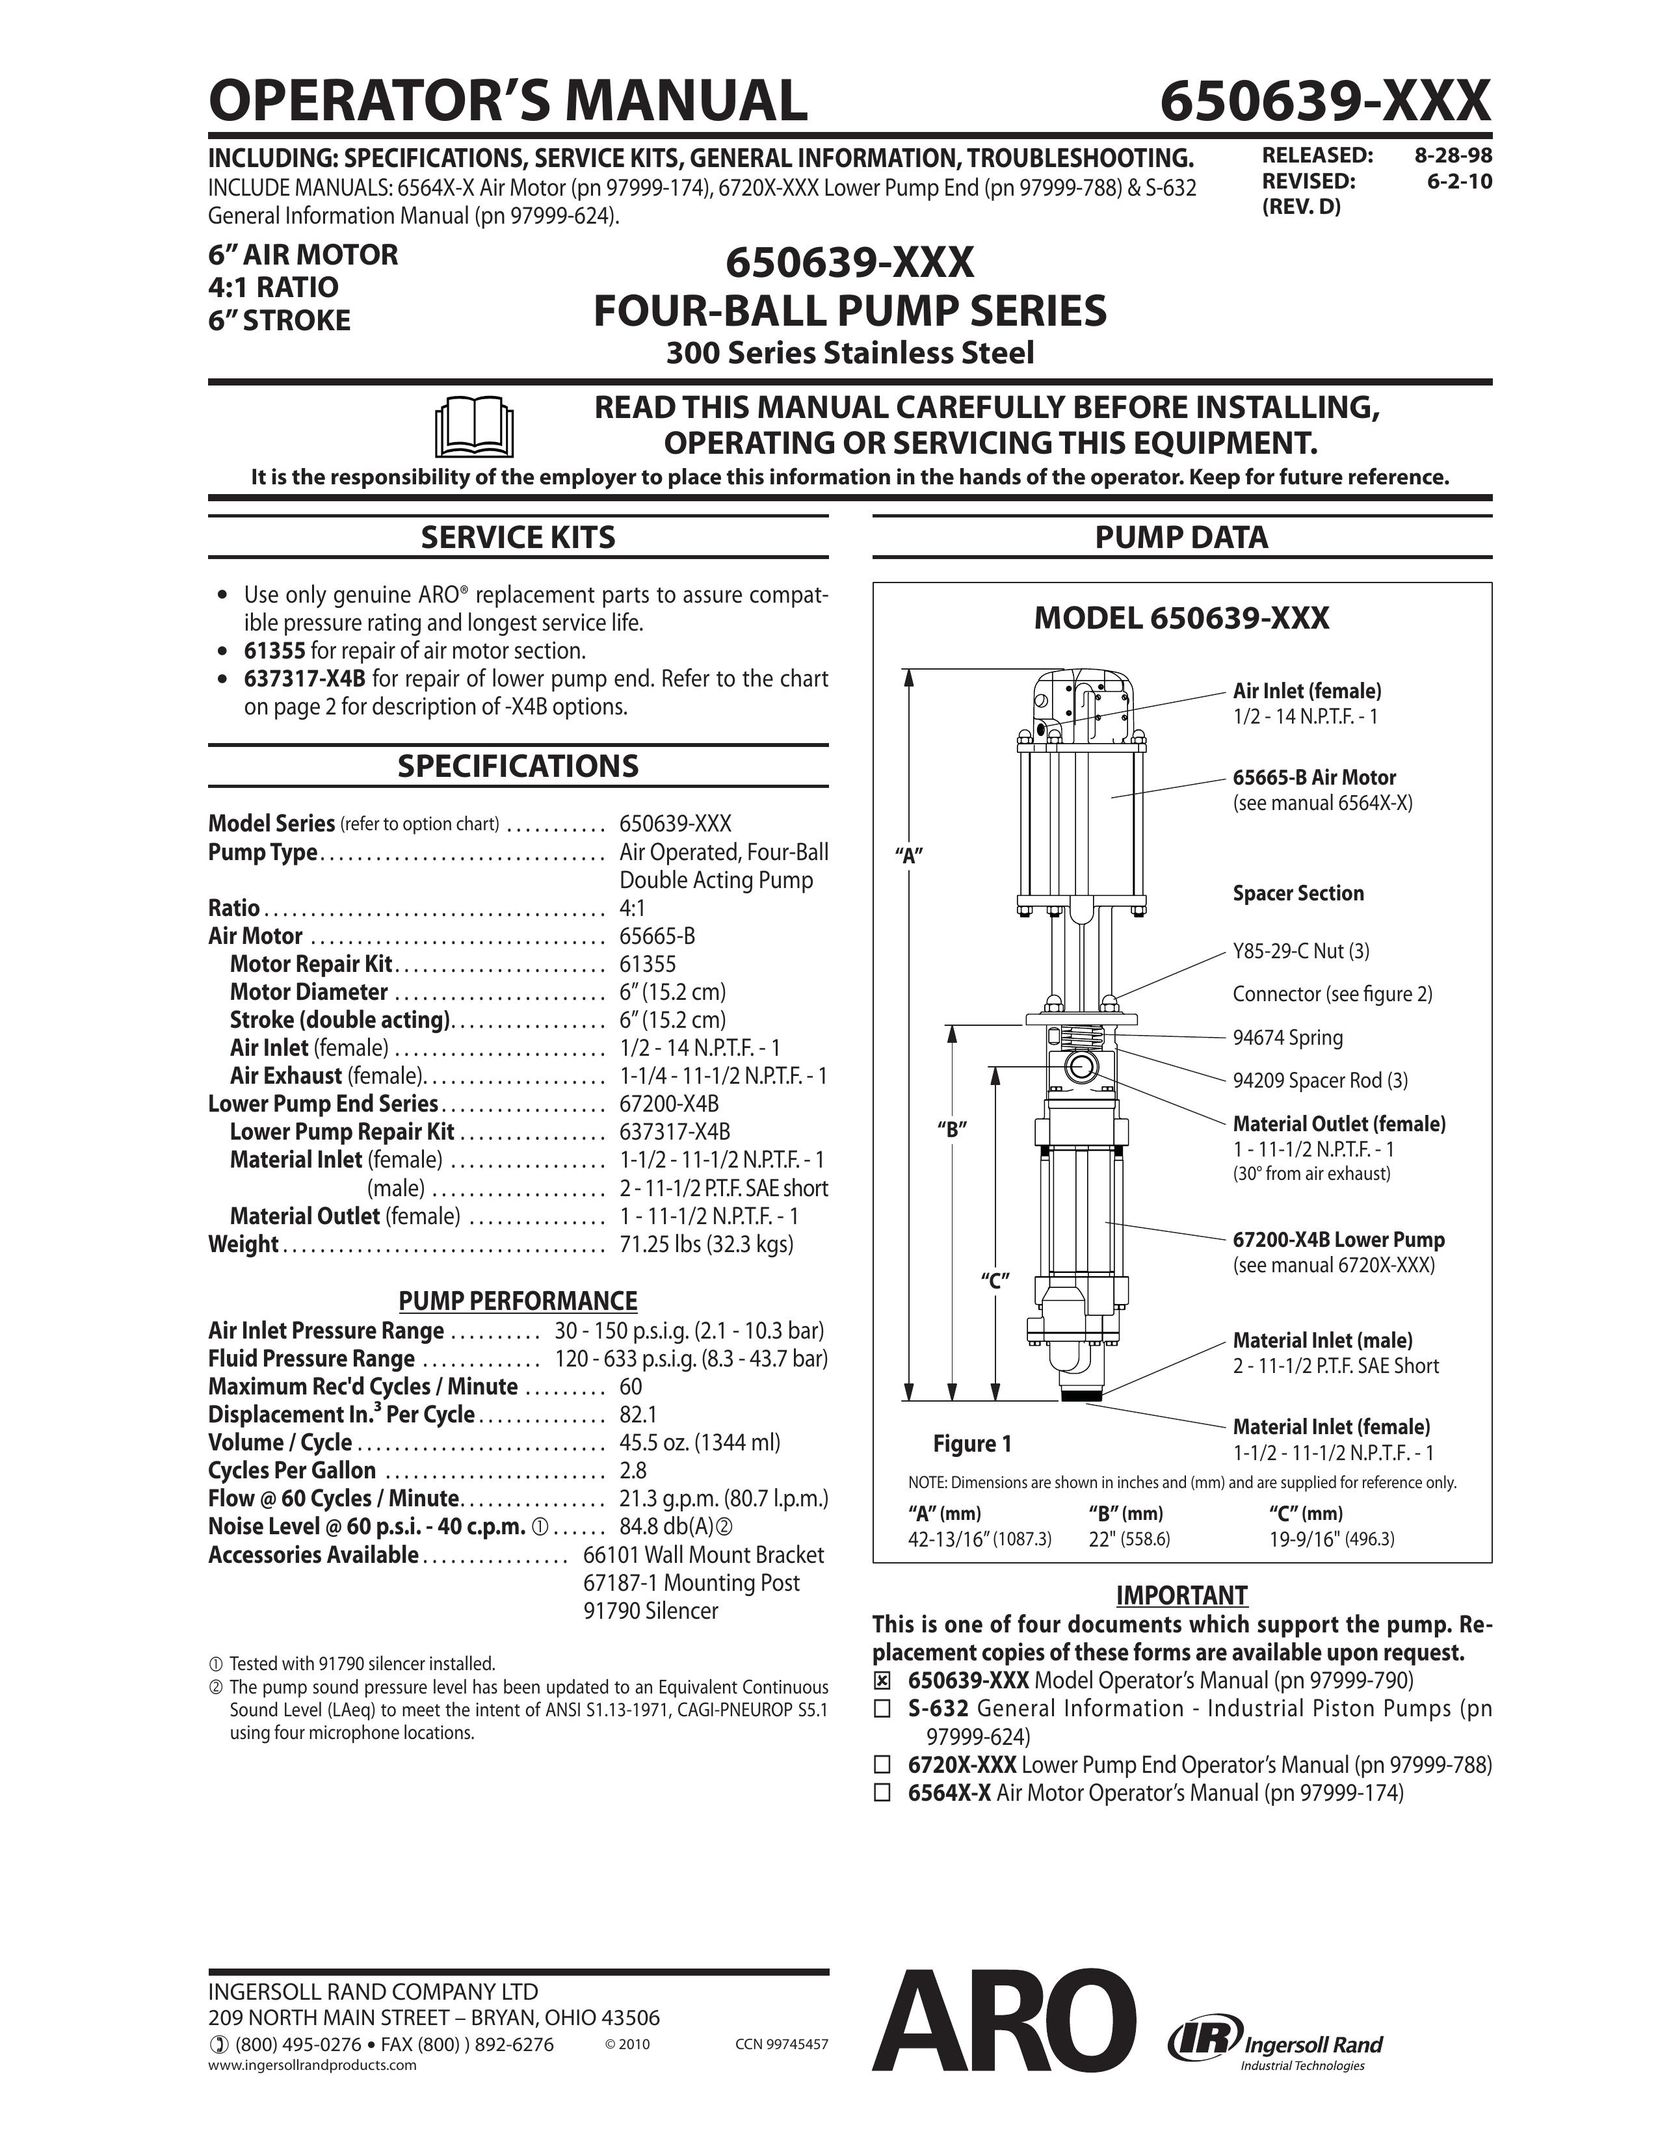 Ingersoll-Rand 650639-XXX Septic System User Manual